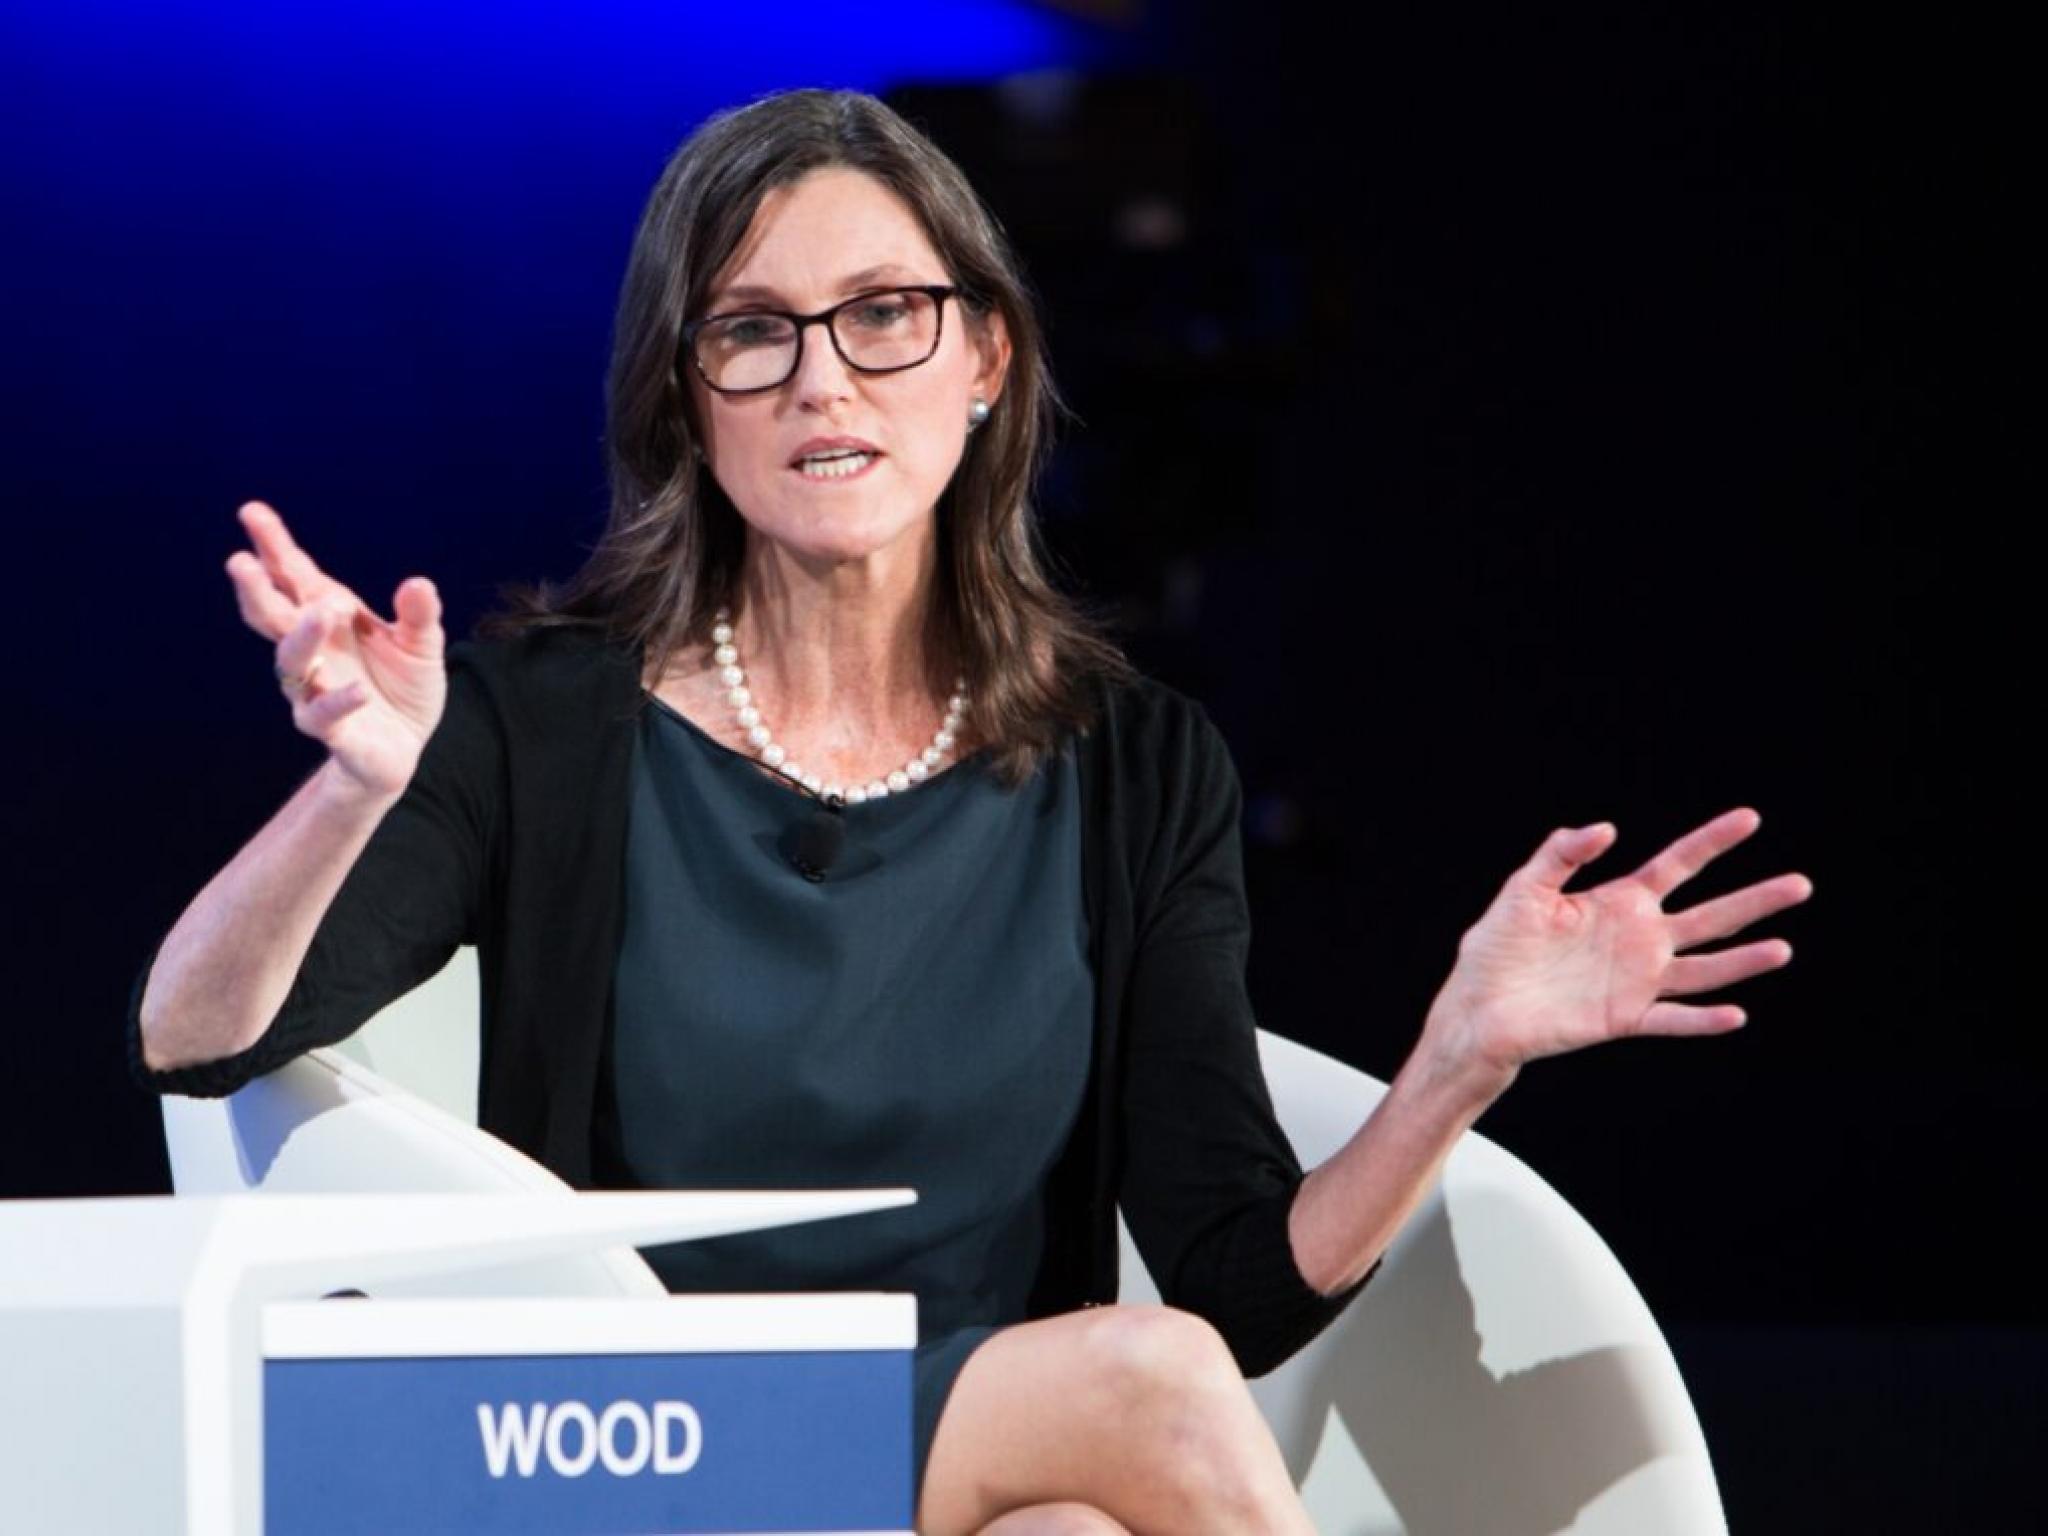  cathie-woods-ark-continues-tesla-stock-buying-spree-acquires-over-14m-worth-of-shares-amid-dip 